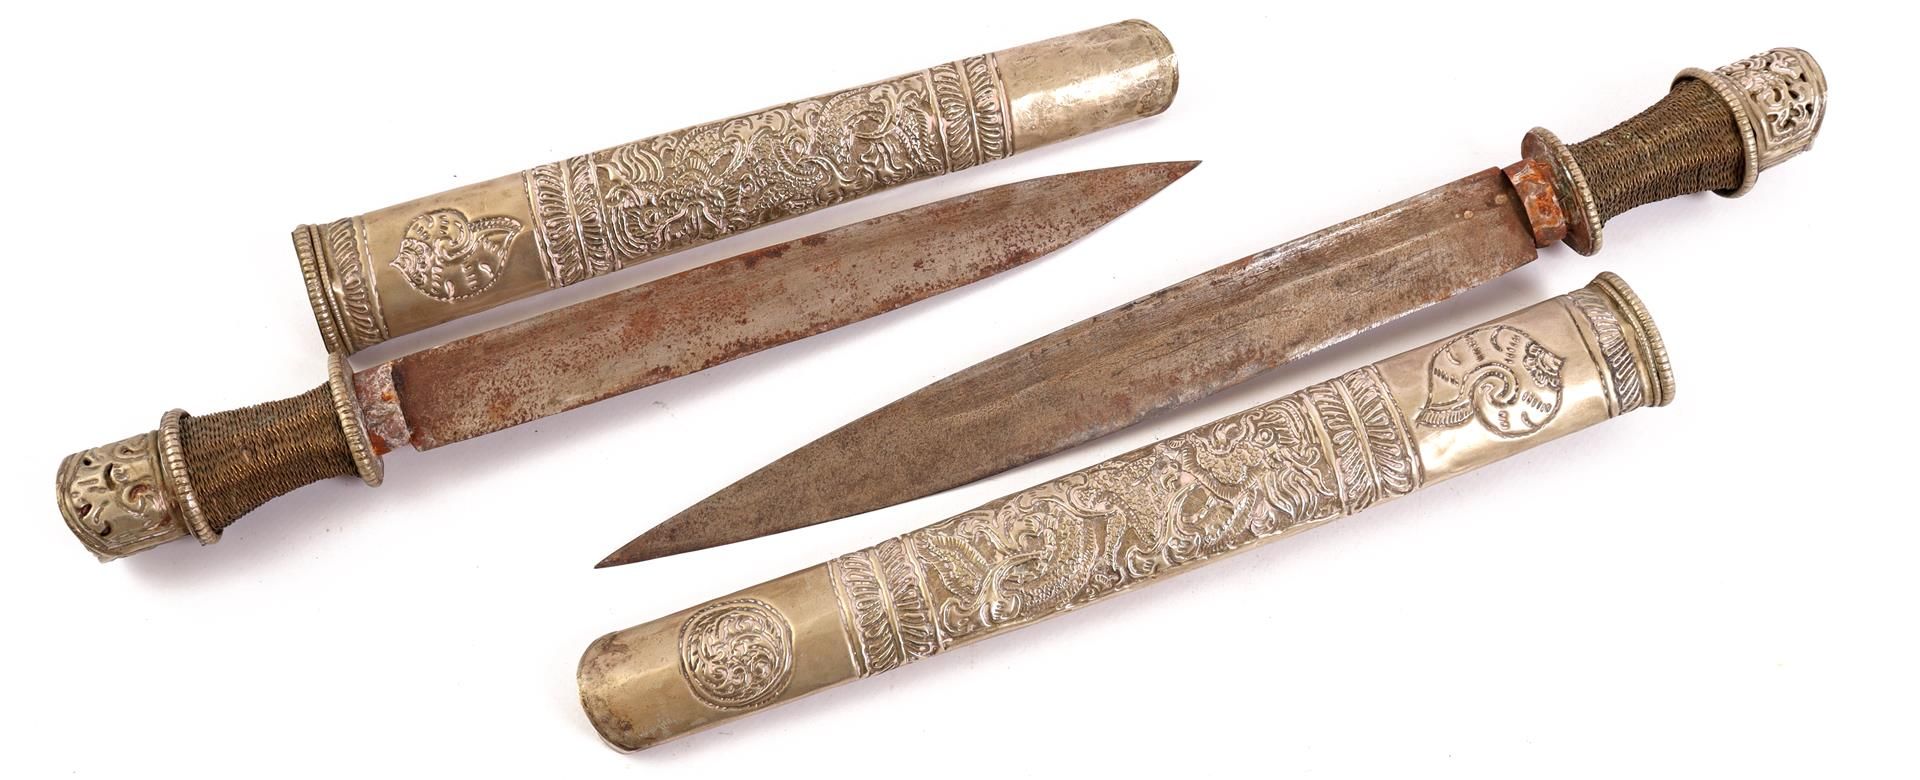 2 metal Asian daggers in richly decorated metal sheaths, total 34 cm and 40 cm long